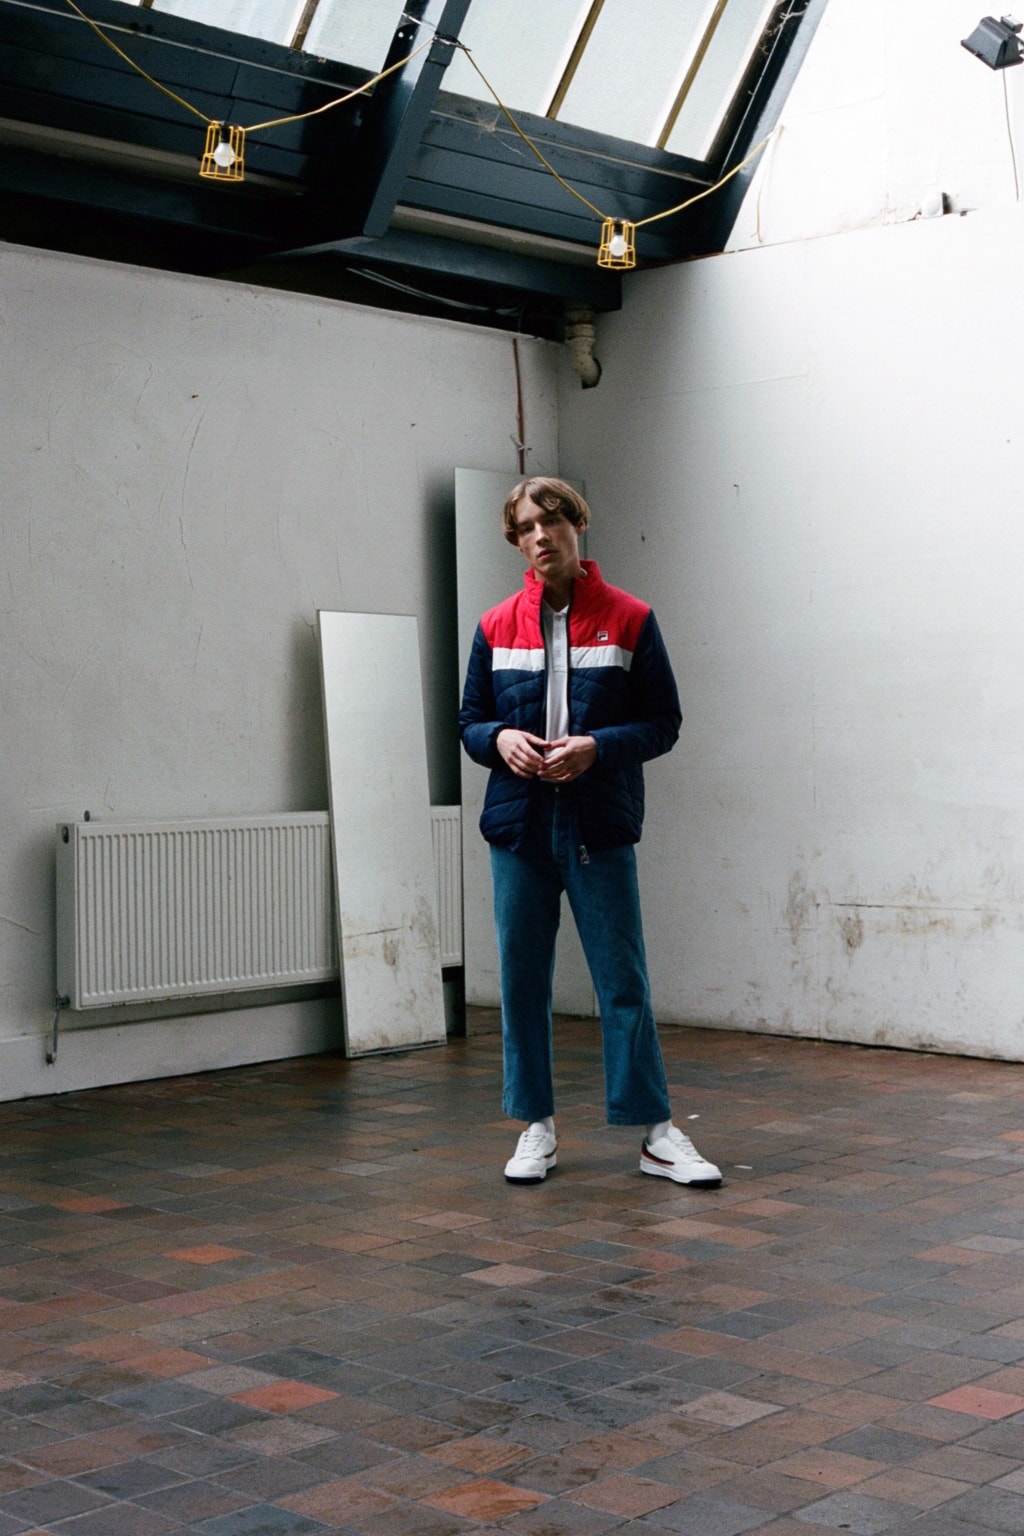 FILA 2016 Fall/Winter "Vintage" Campaign blue white red